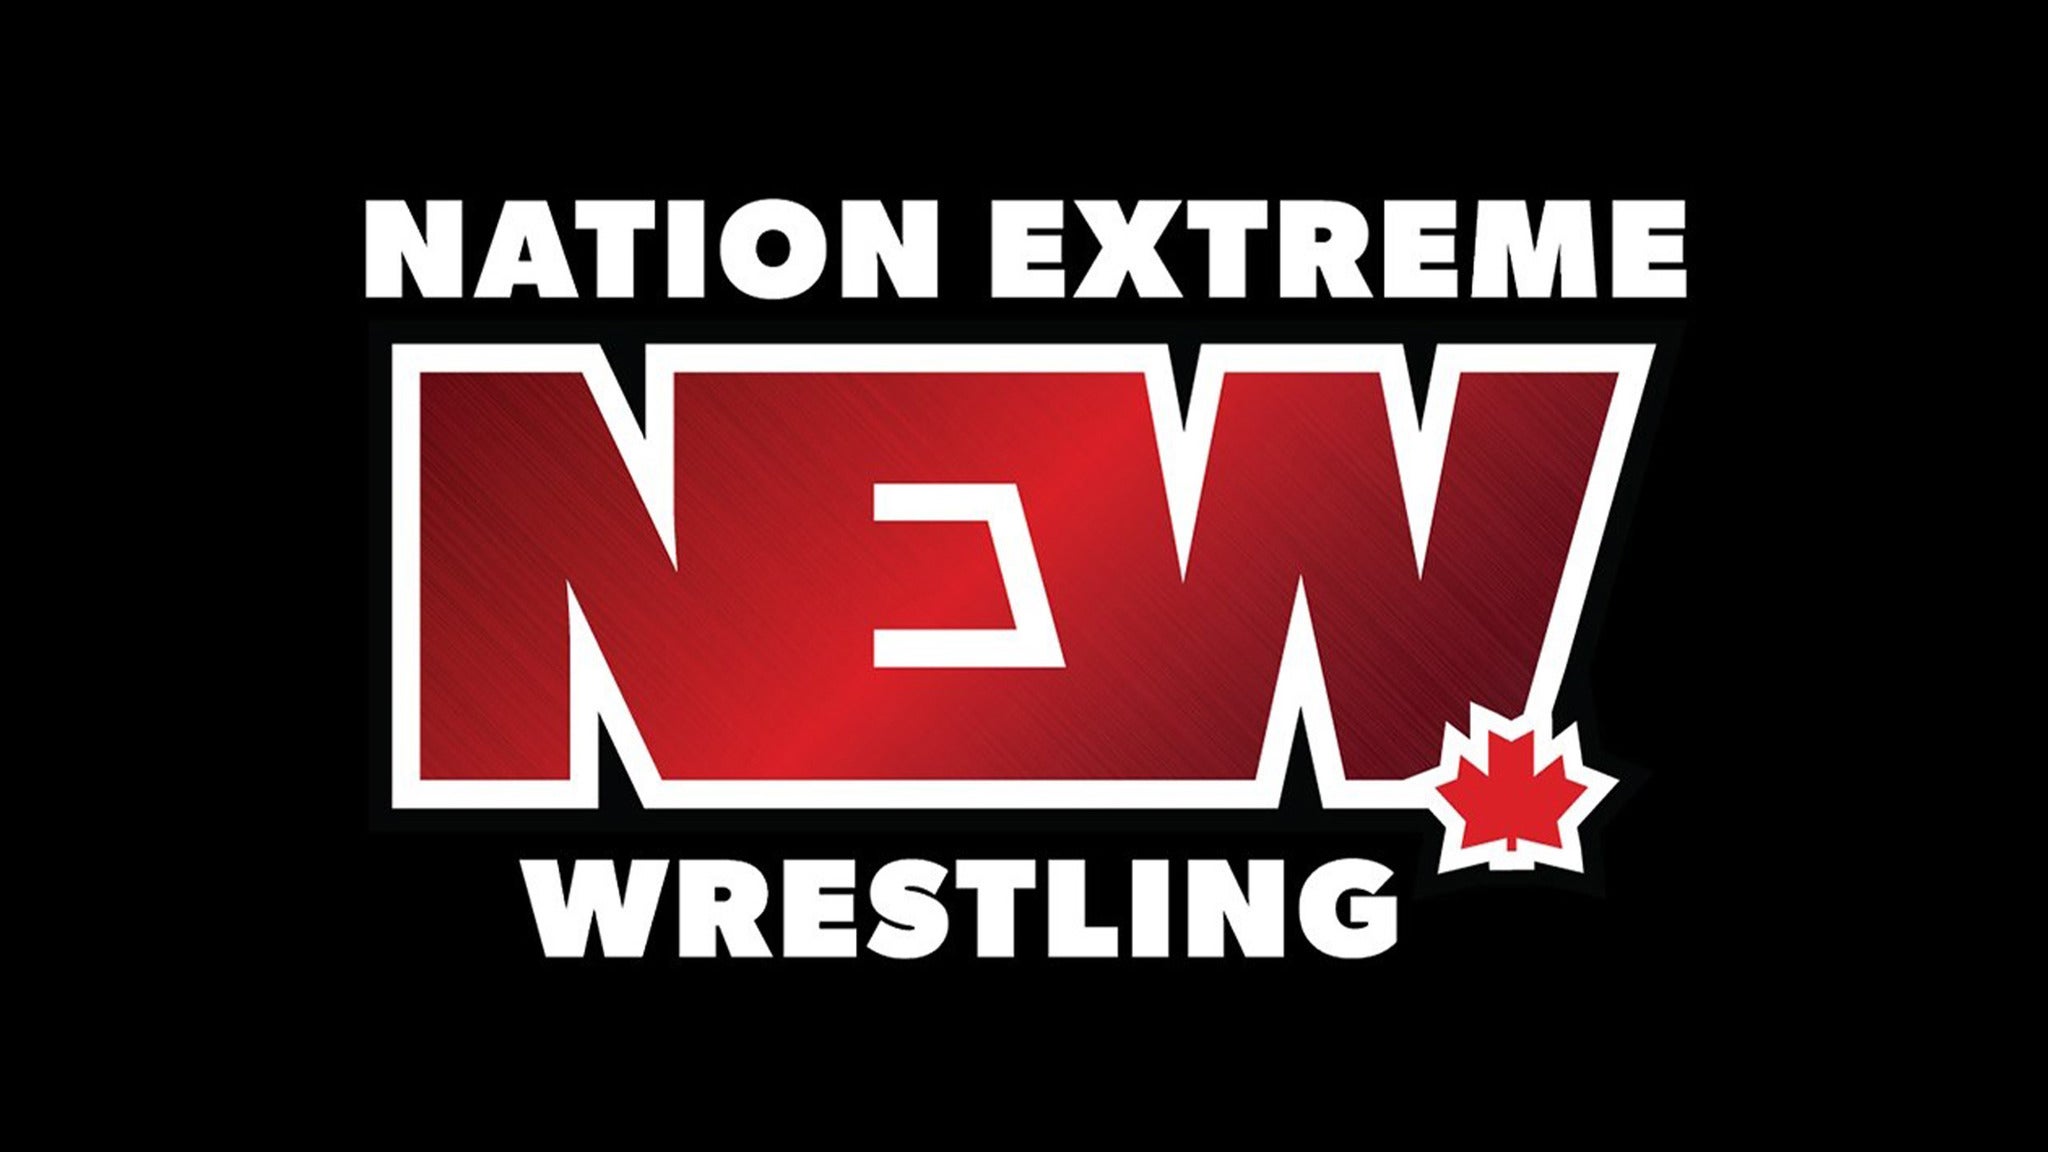 Nation Extreme Wrestling (NEW Wrestling) presale password for performance tickets in Vancouver, BC (Commodore Ballroom)